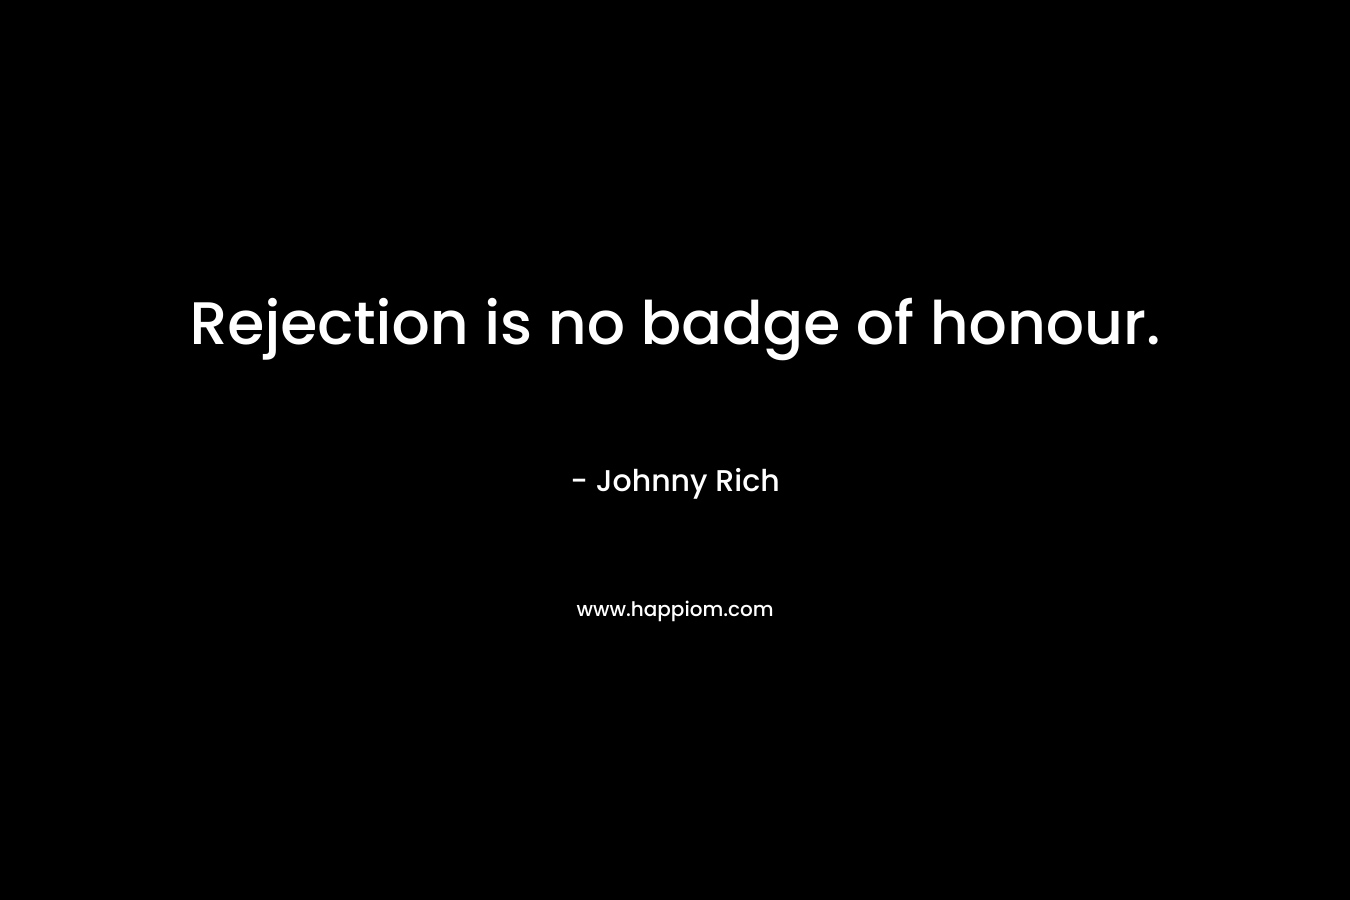 Rejection is no badge of honour. – Johnny Rich